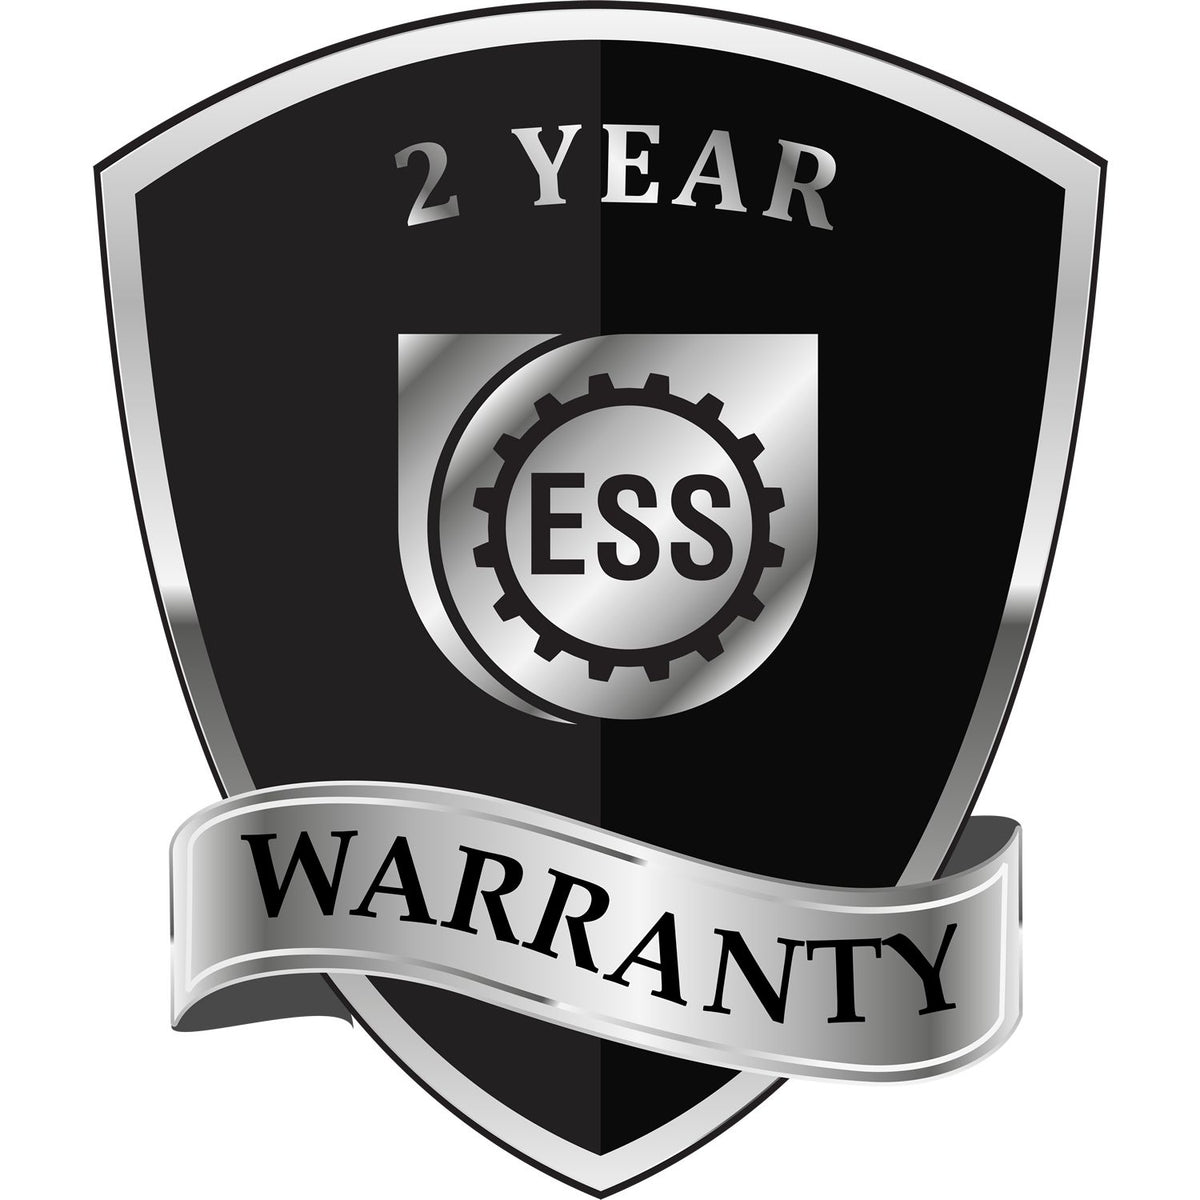 A badge or emblem showing a warranty icon for the Kentucky Engineer Desk Seal